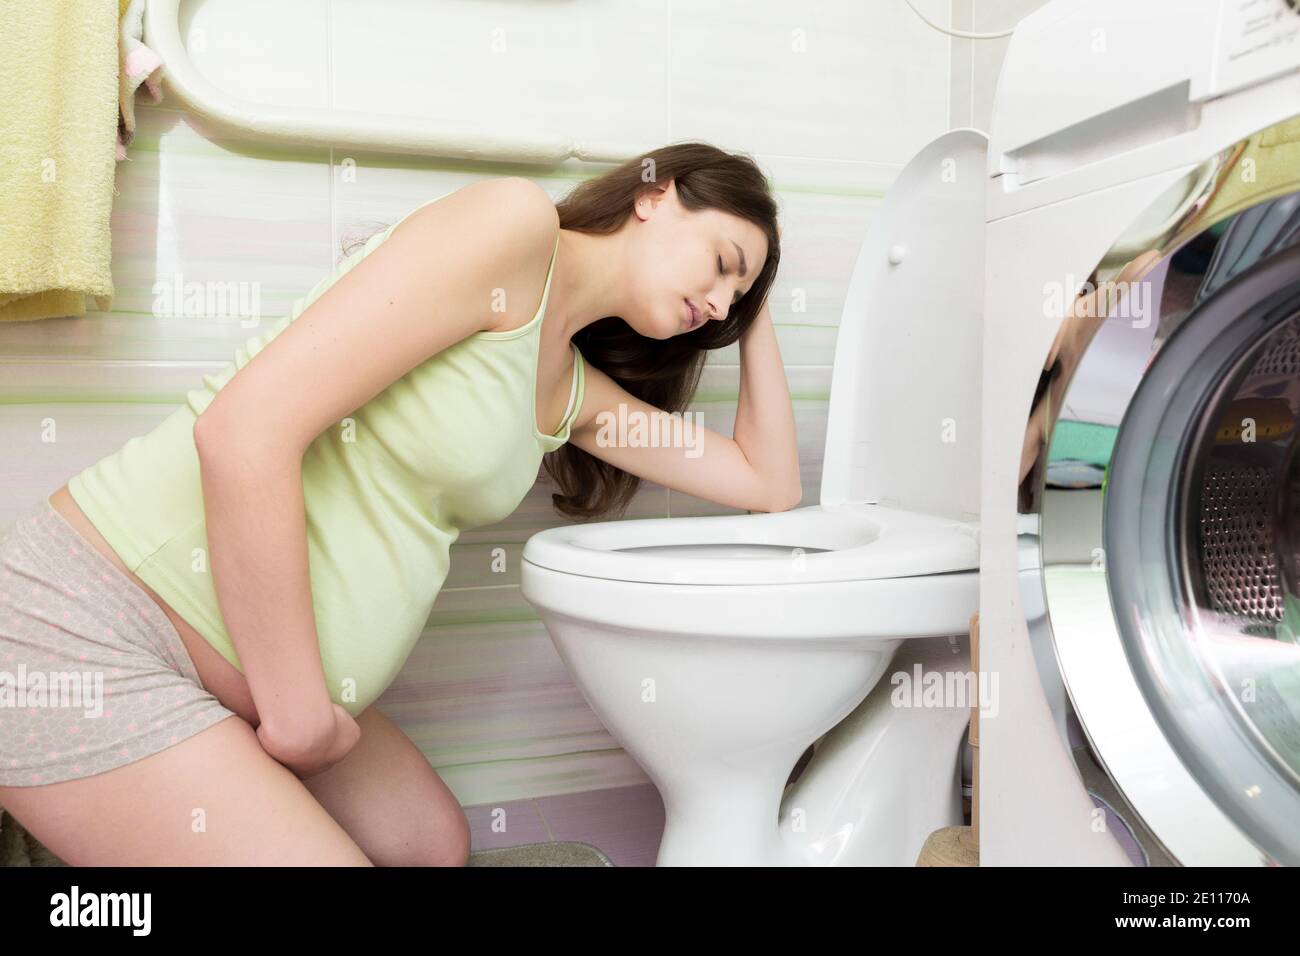 Sick young woman with pain in stomach is vomiting in toilet sitting on the floor at home. Young woman vomiting into the toilet bowl in bathroom. Stock Photo